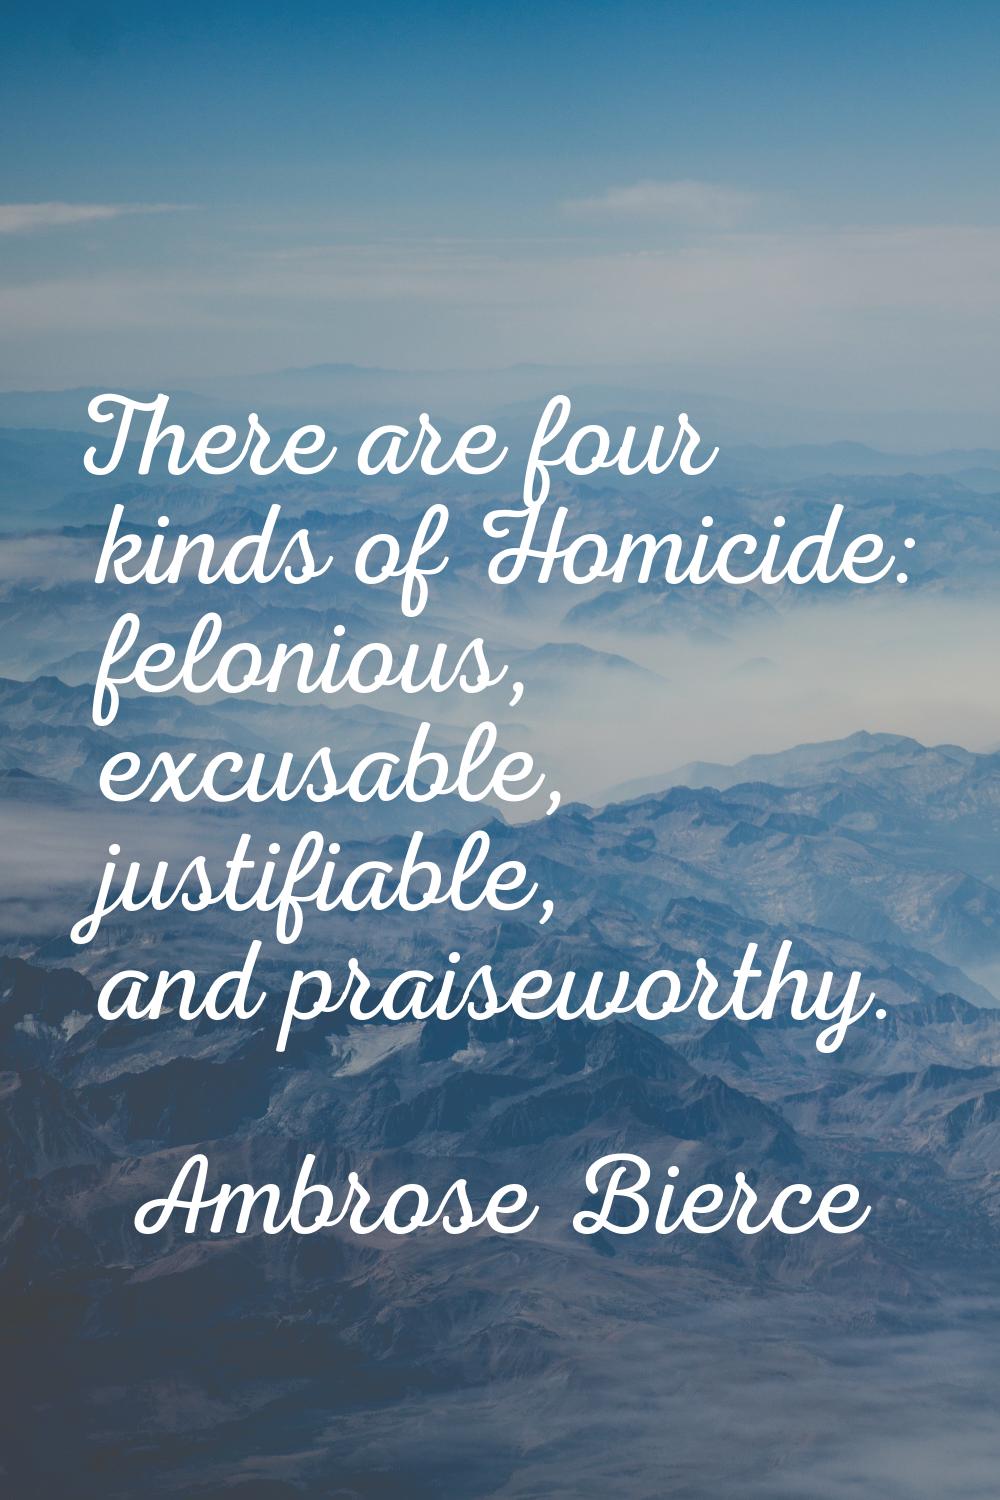 There are four kinds of Homicide: felonious, excusable, justifiable, and praiseworthy.